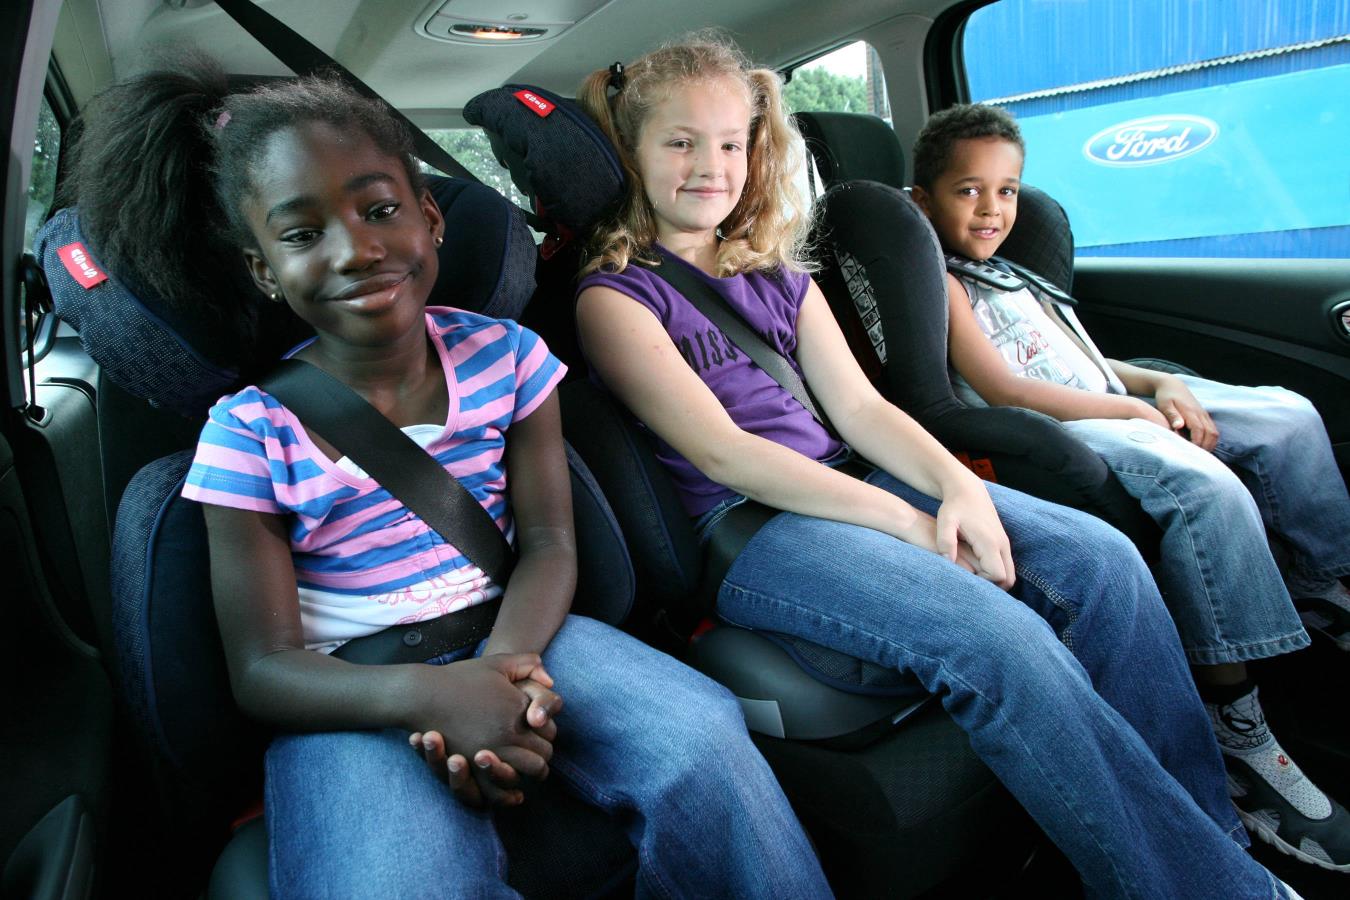 For children of three years and over, what are the seating regulations in a car?